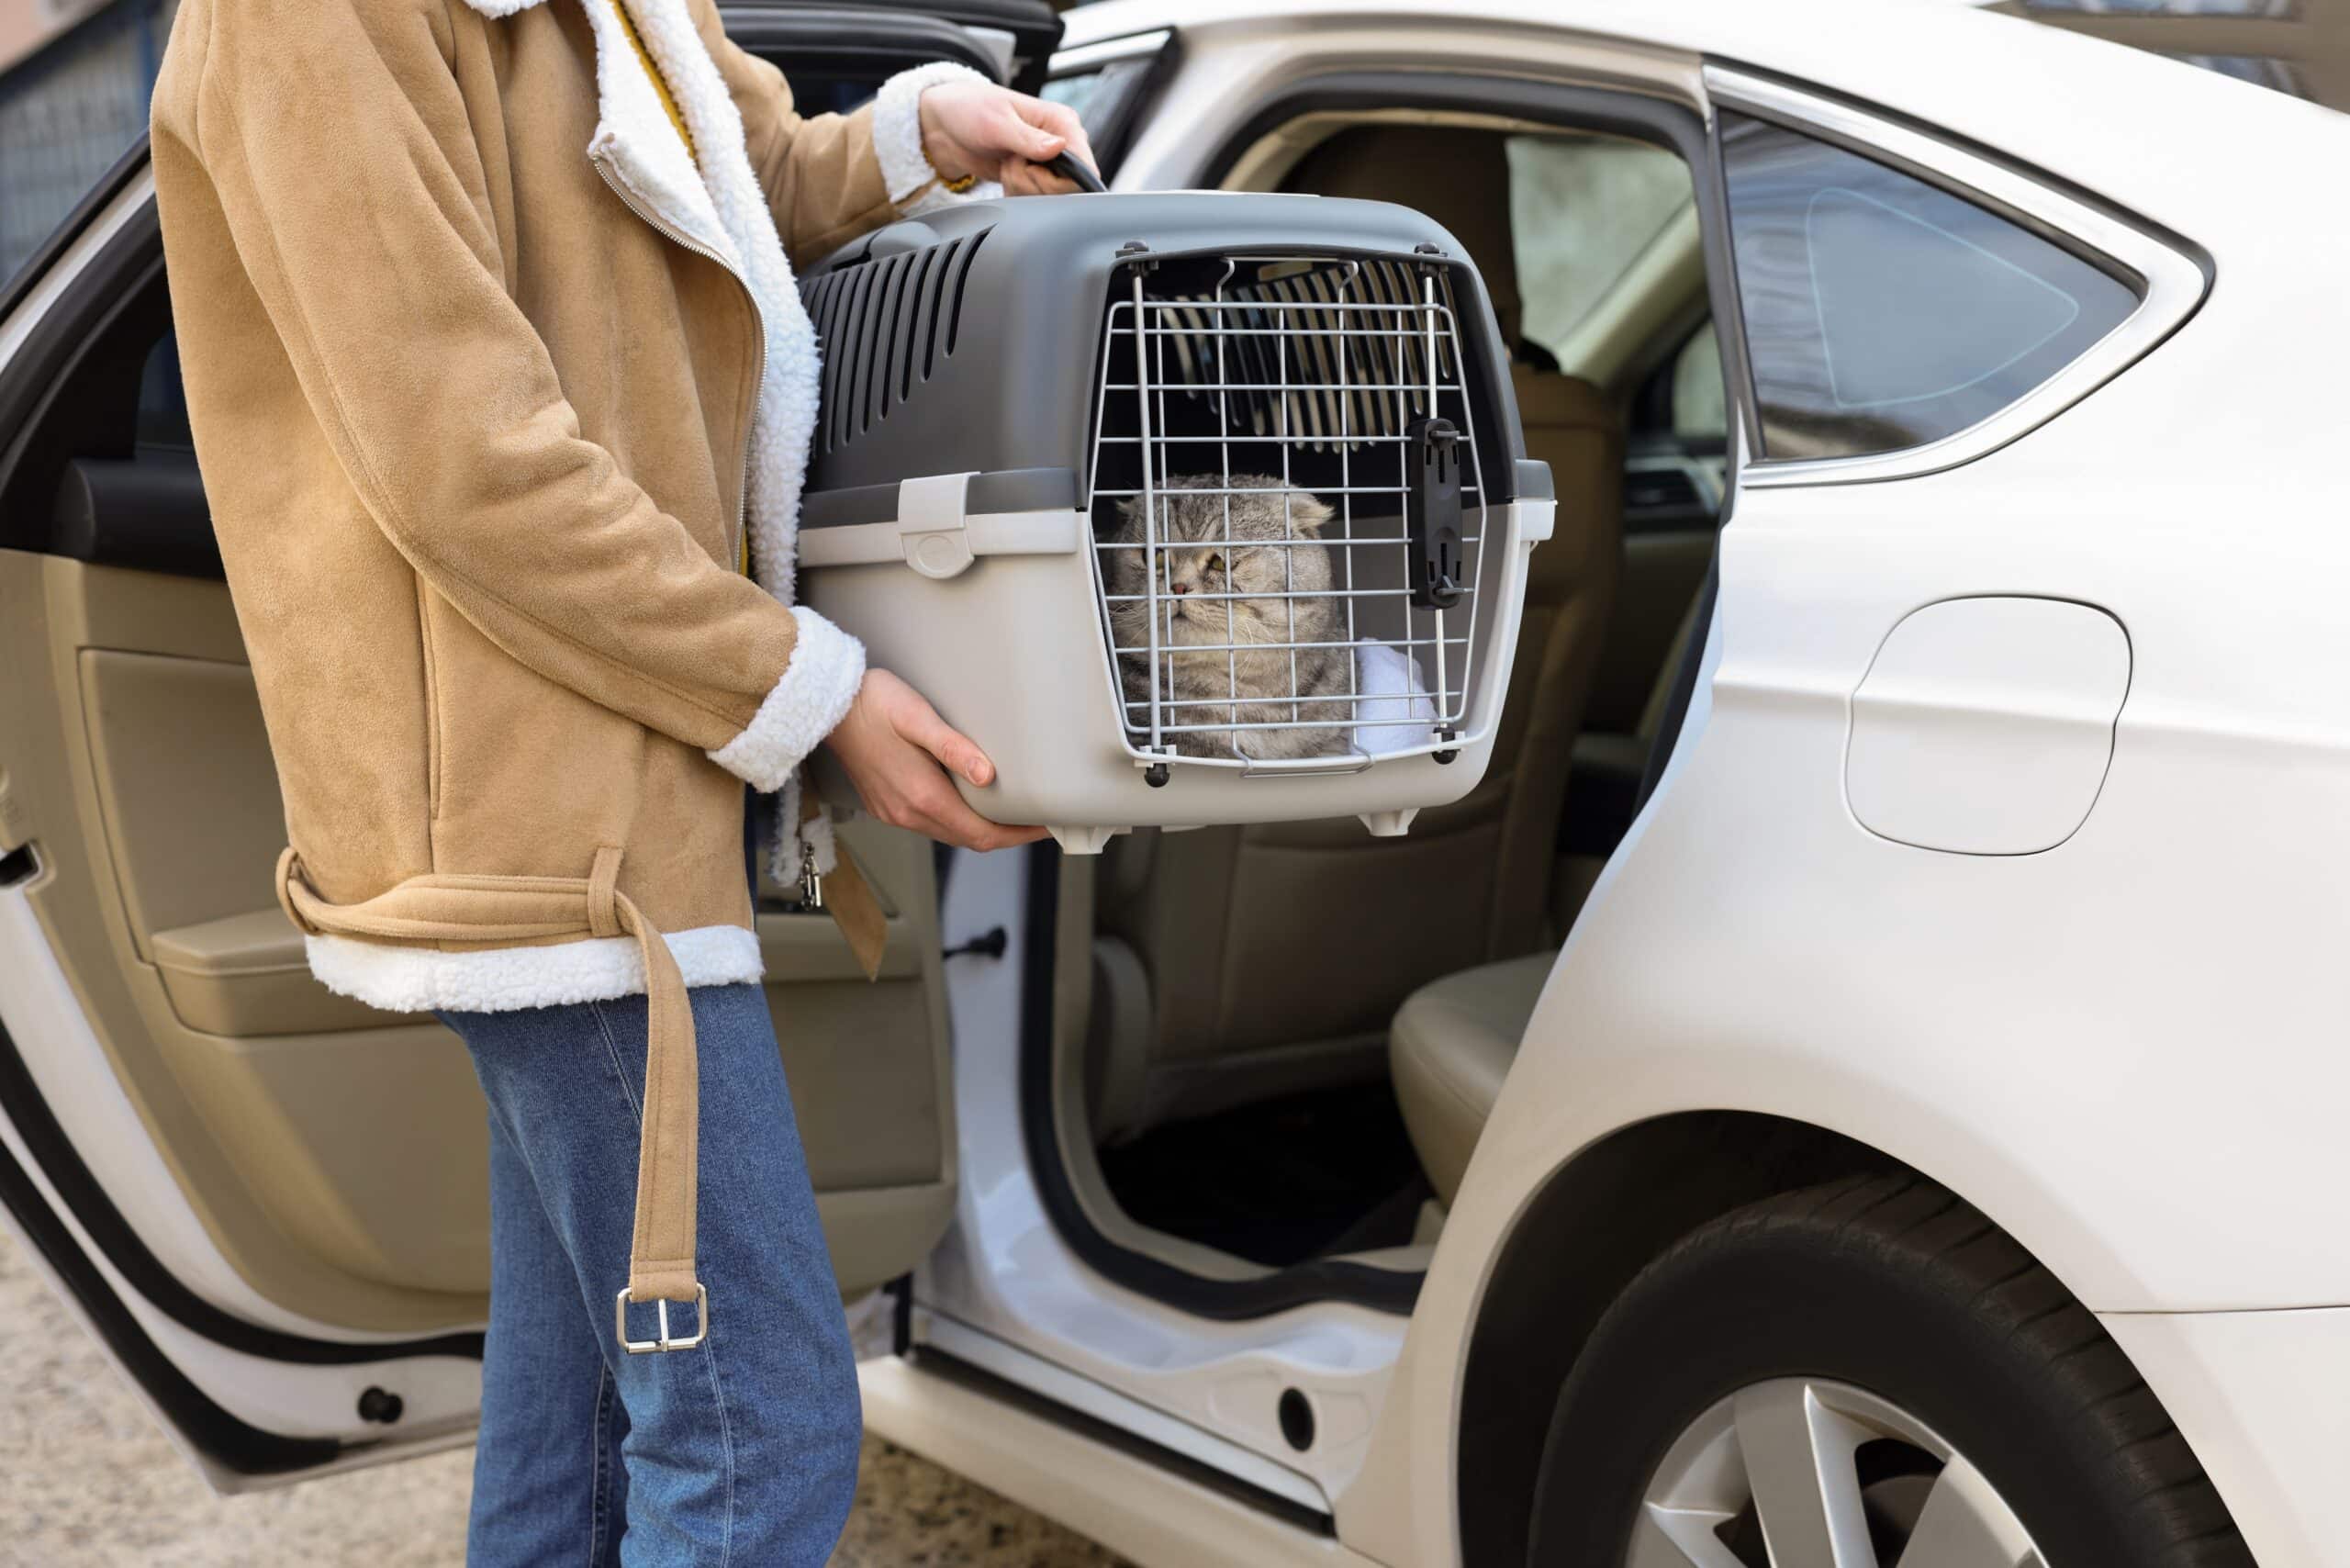 Woman holding a cat in a carrier, placing into car